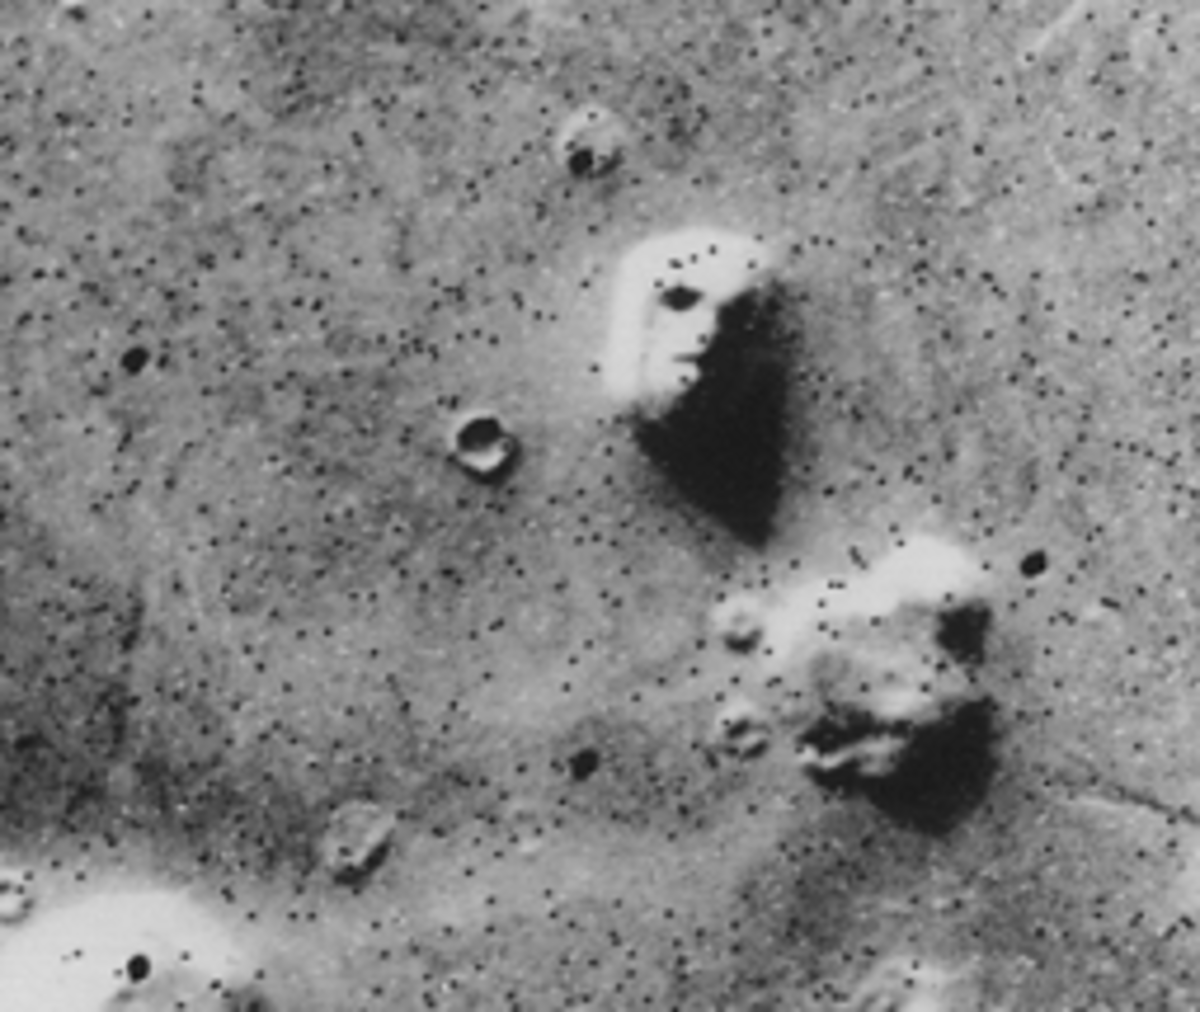 The "face" on Mars